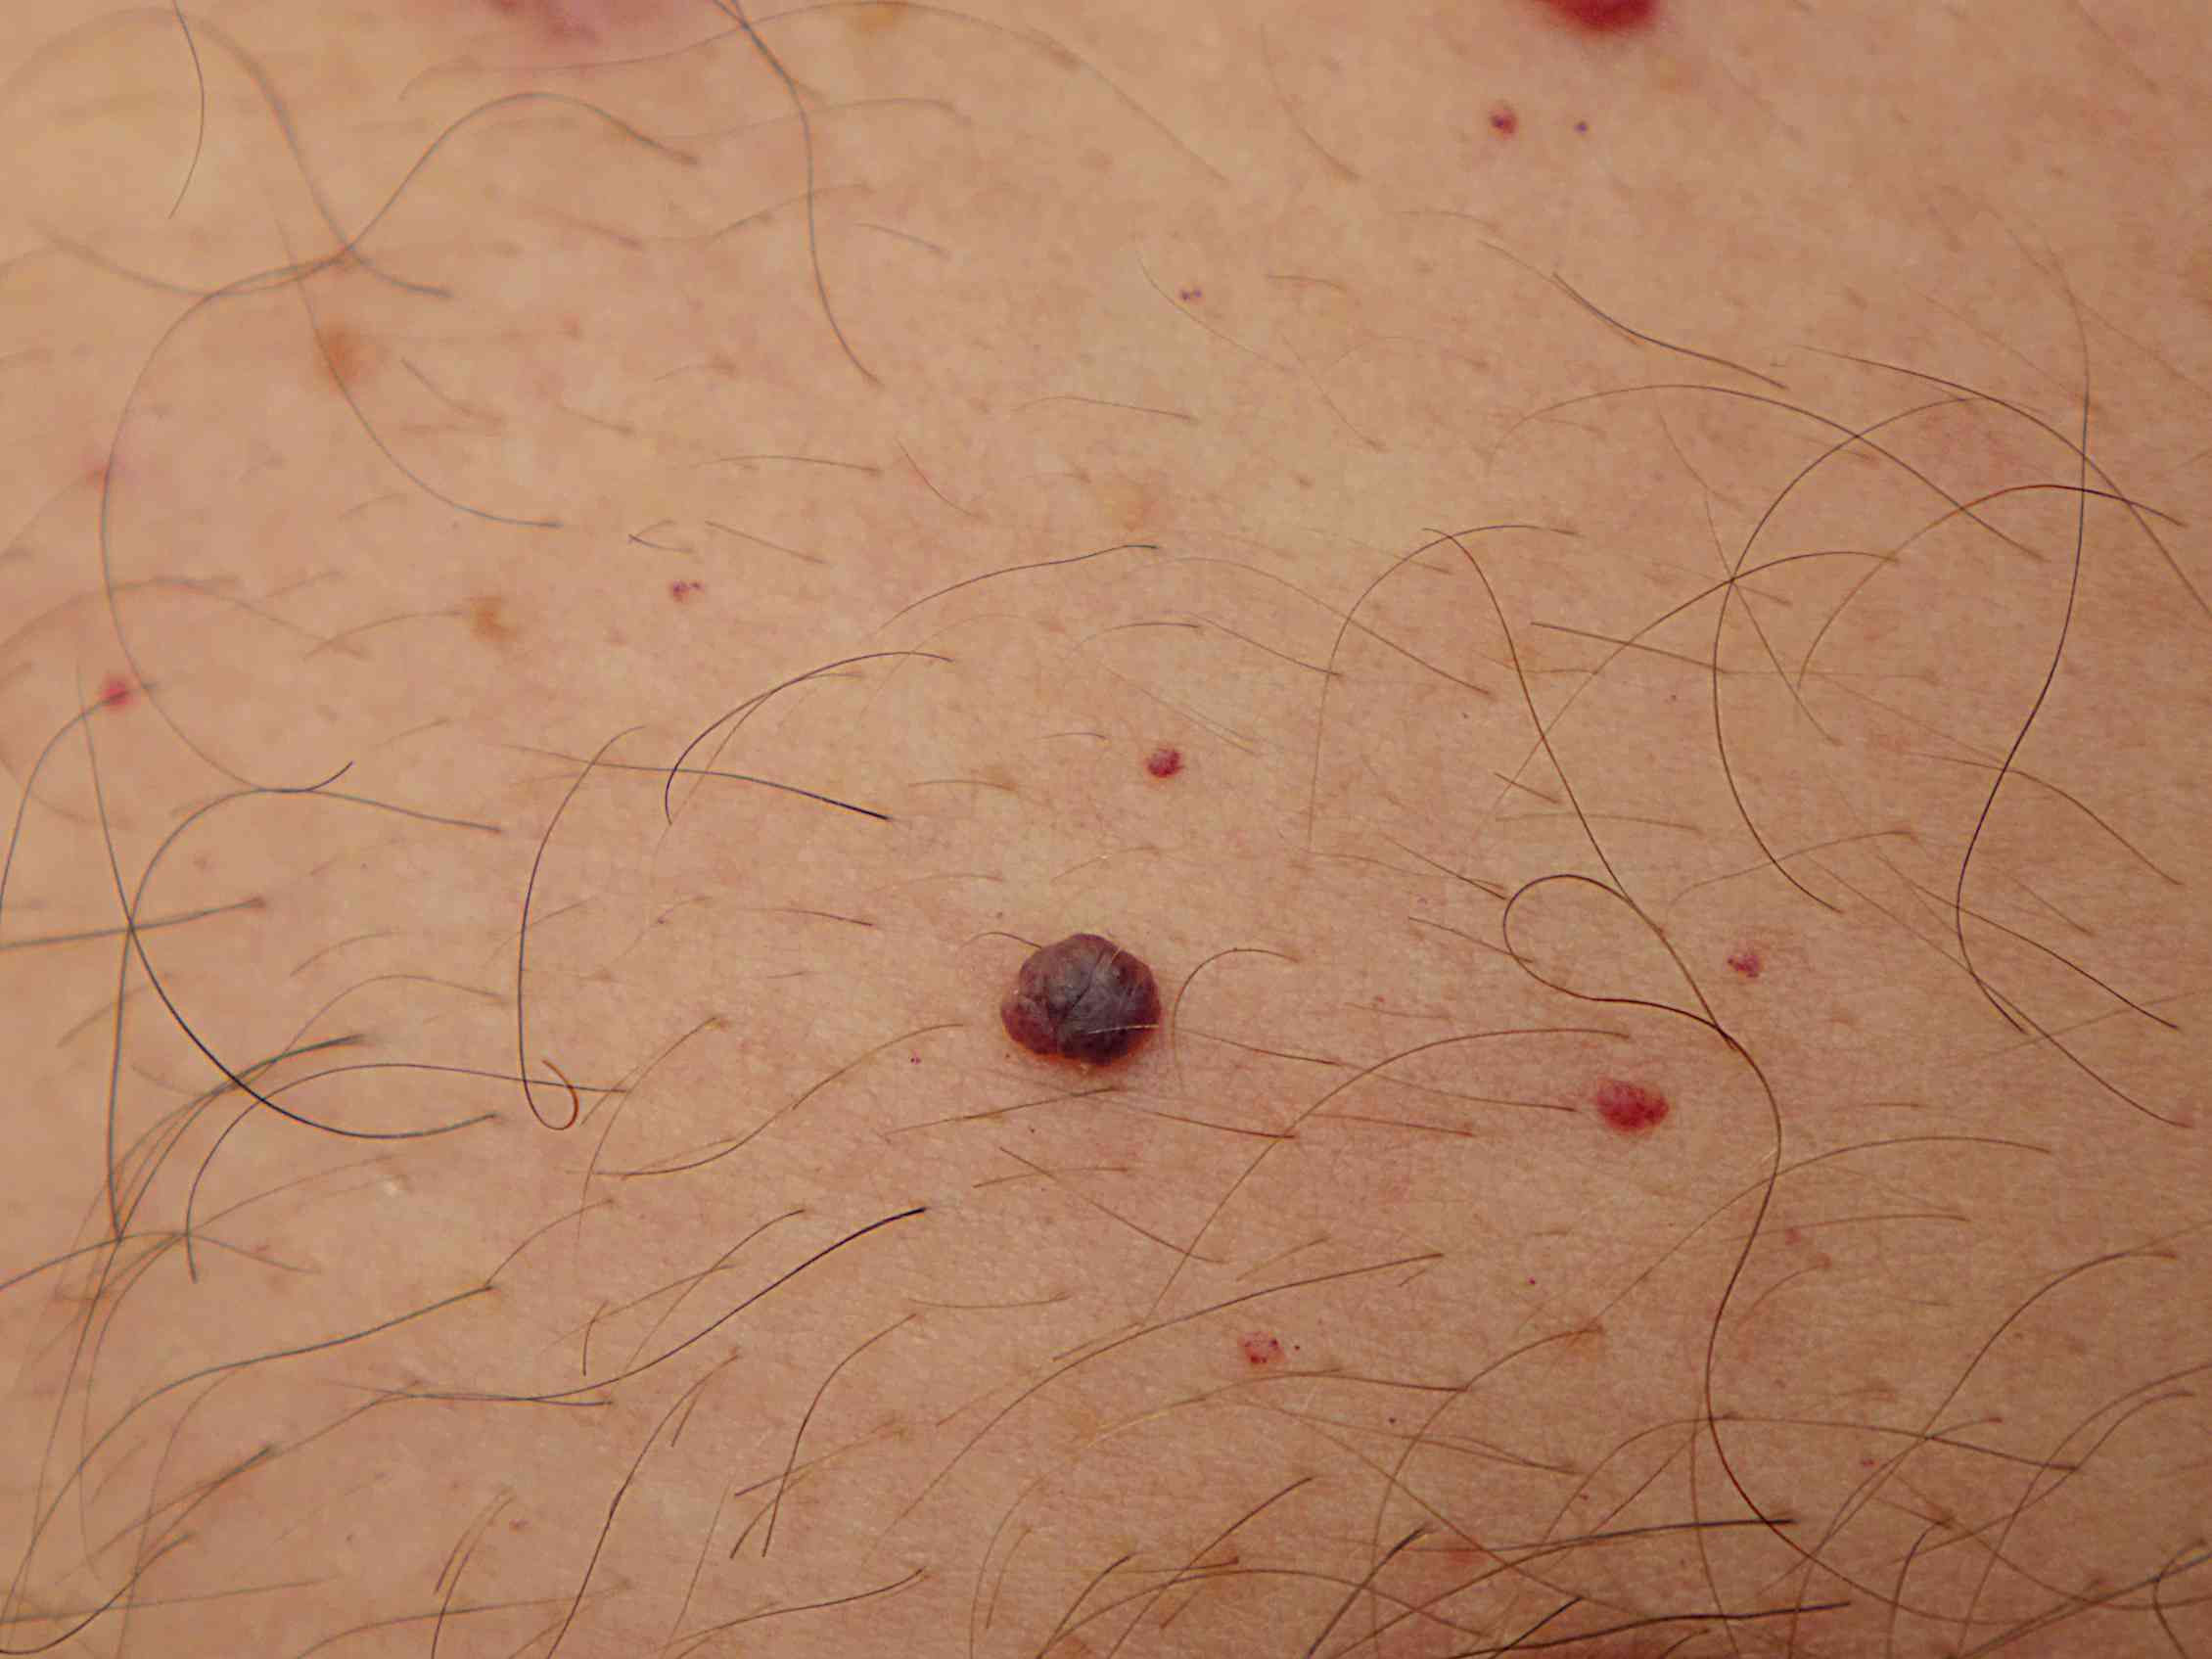 Common Lumps And Bumps On And Under The Skin What Are They